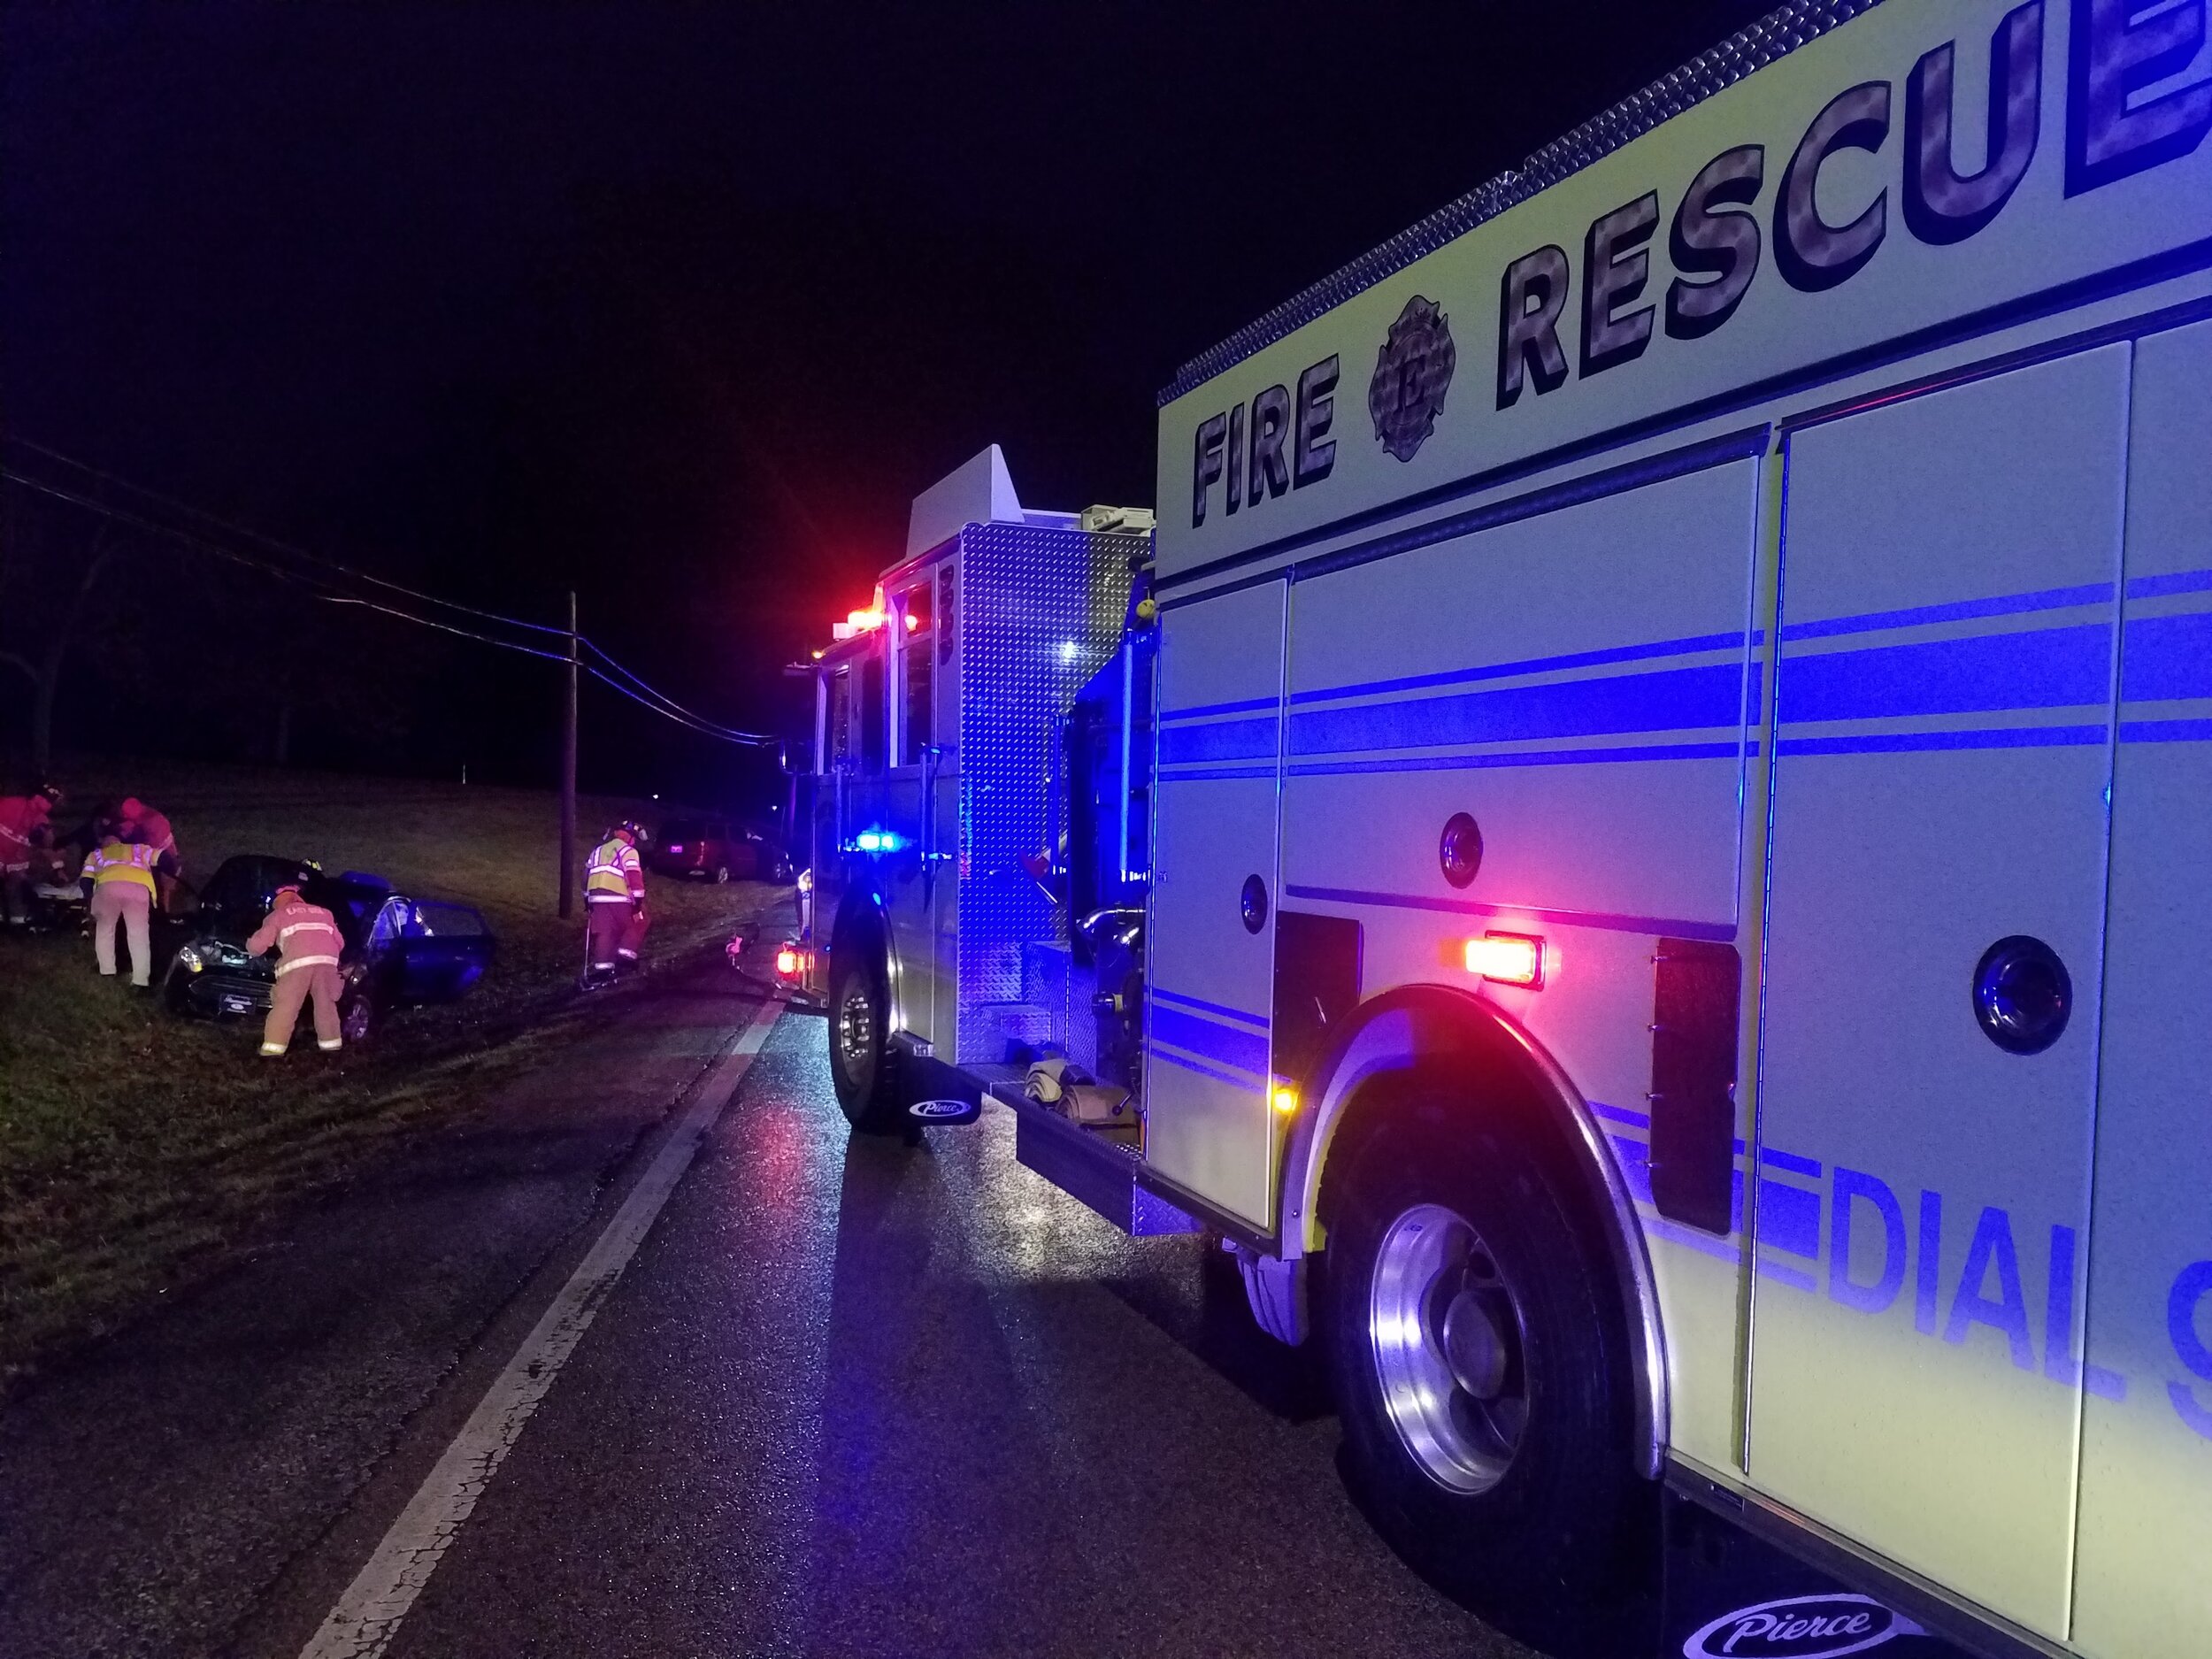  On 12/28/2019, The East Side Fire Department responded for a vehicle accident near Lebanon Ave and St. John Dr. Upon arrival, firefighters located two vehicles with significant damage. Firefighters utilized hydraulic extrication equipment to provide